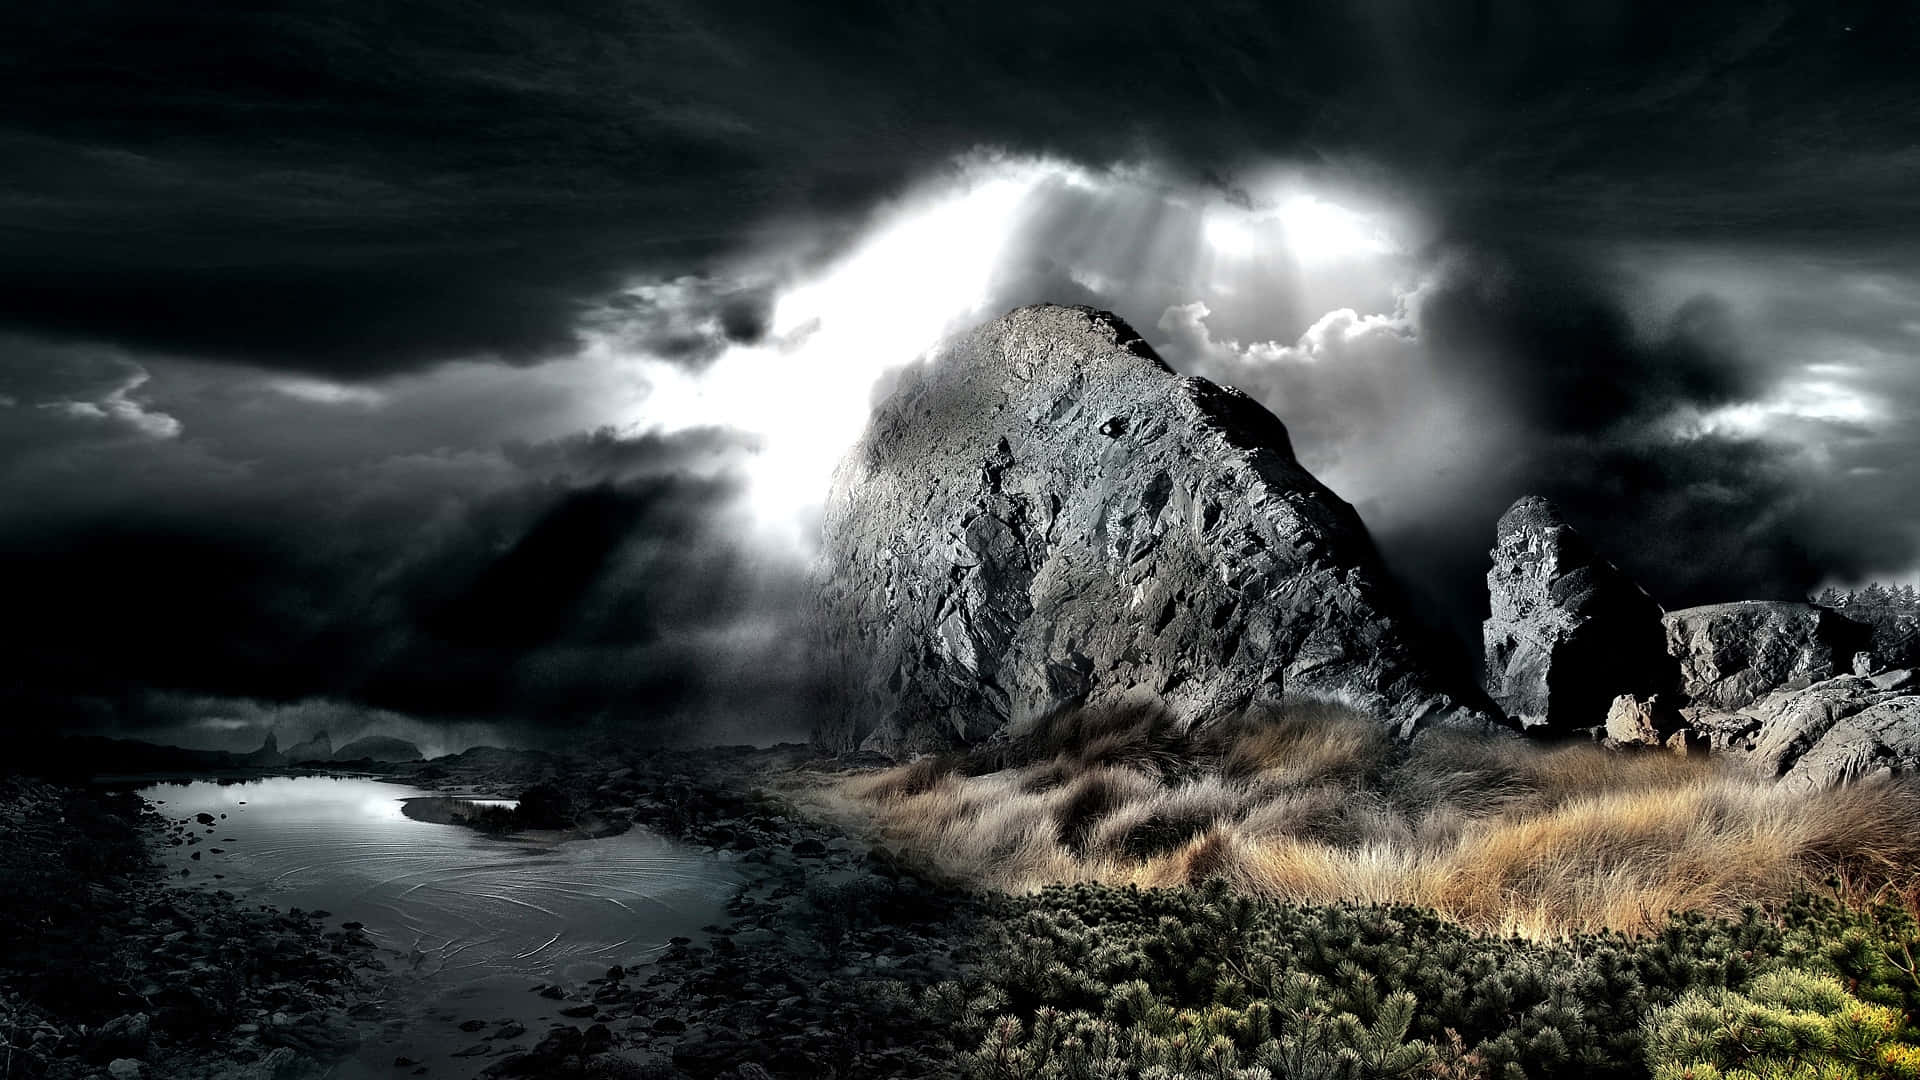 Dark Rock Formation Against a Stormy Sky Wallpaper